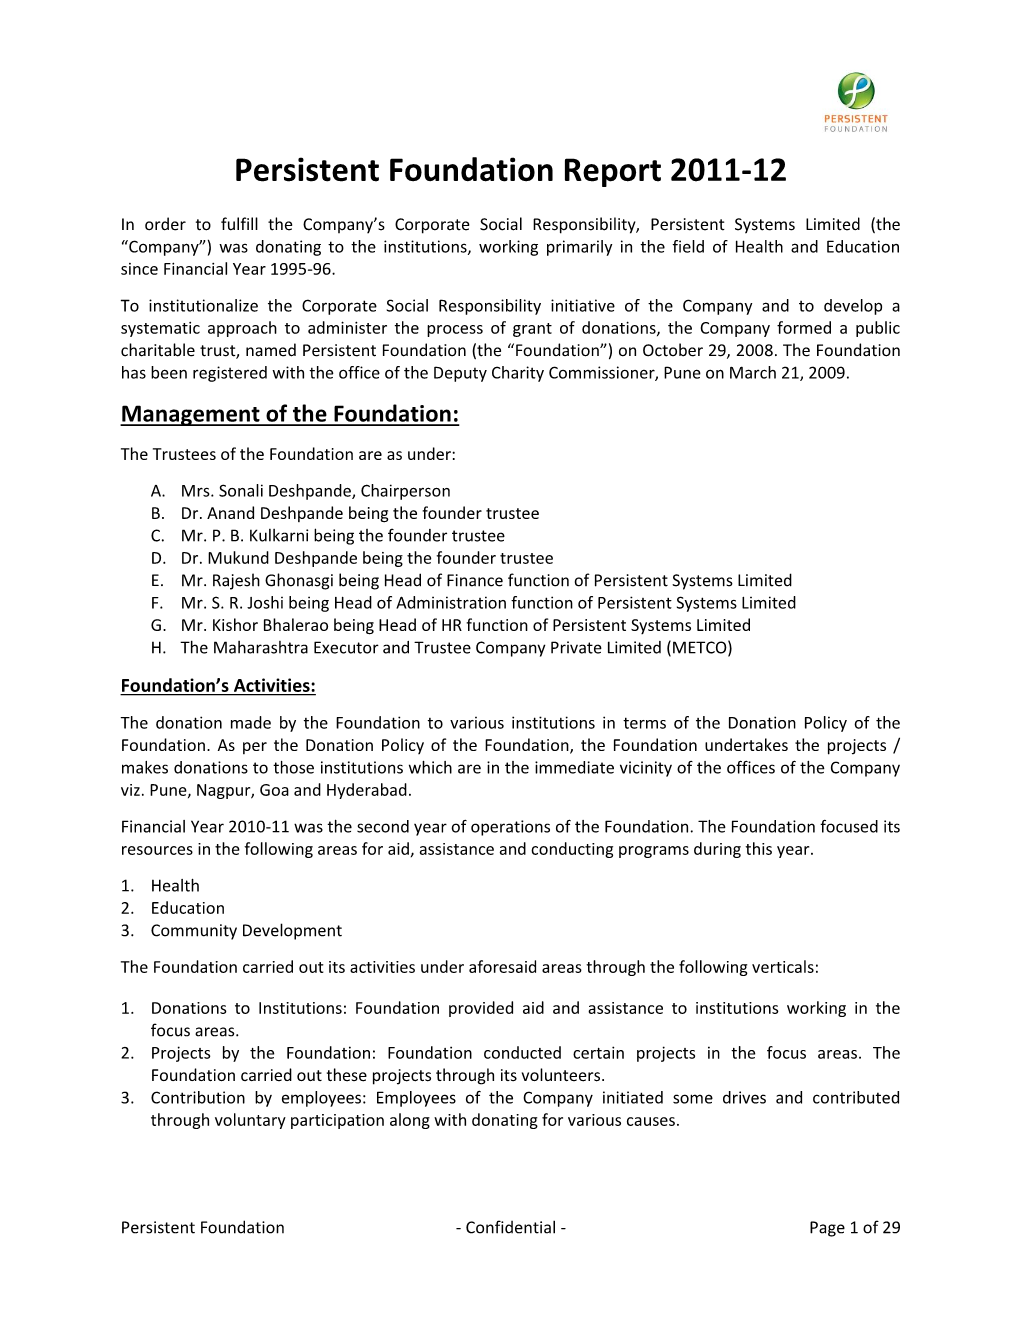 Persistent Foundation Report 2011-12